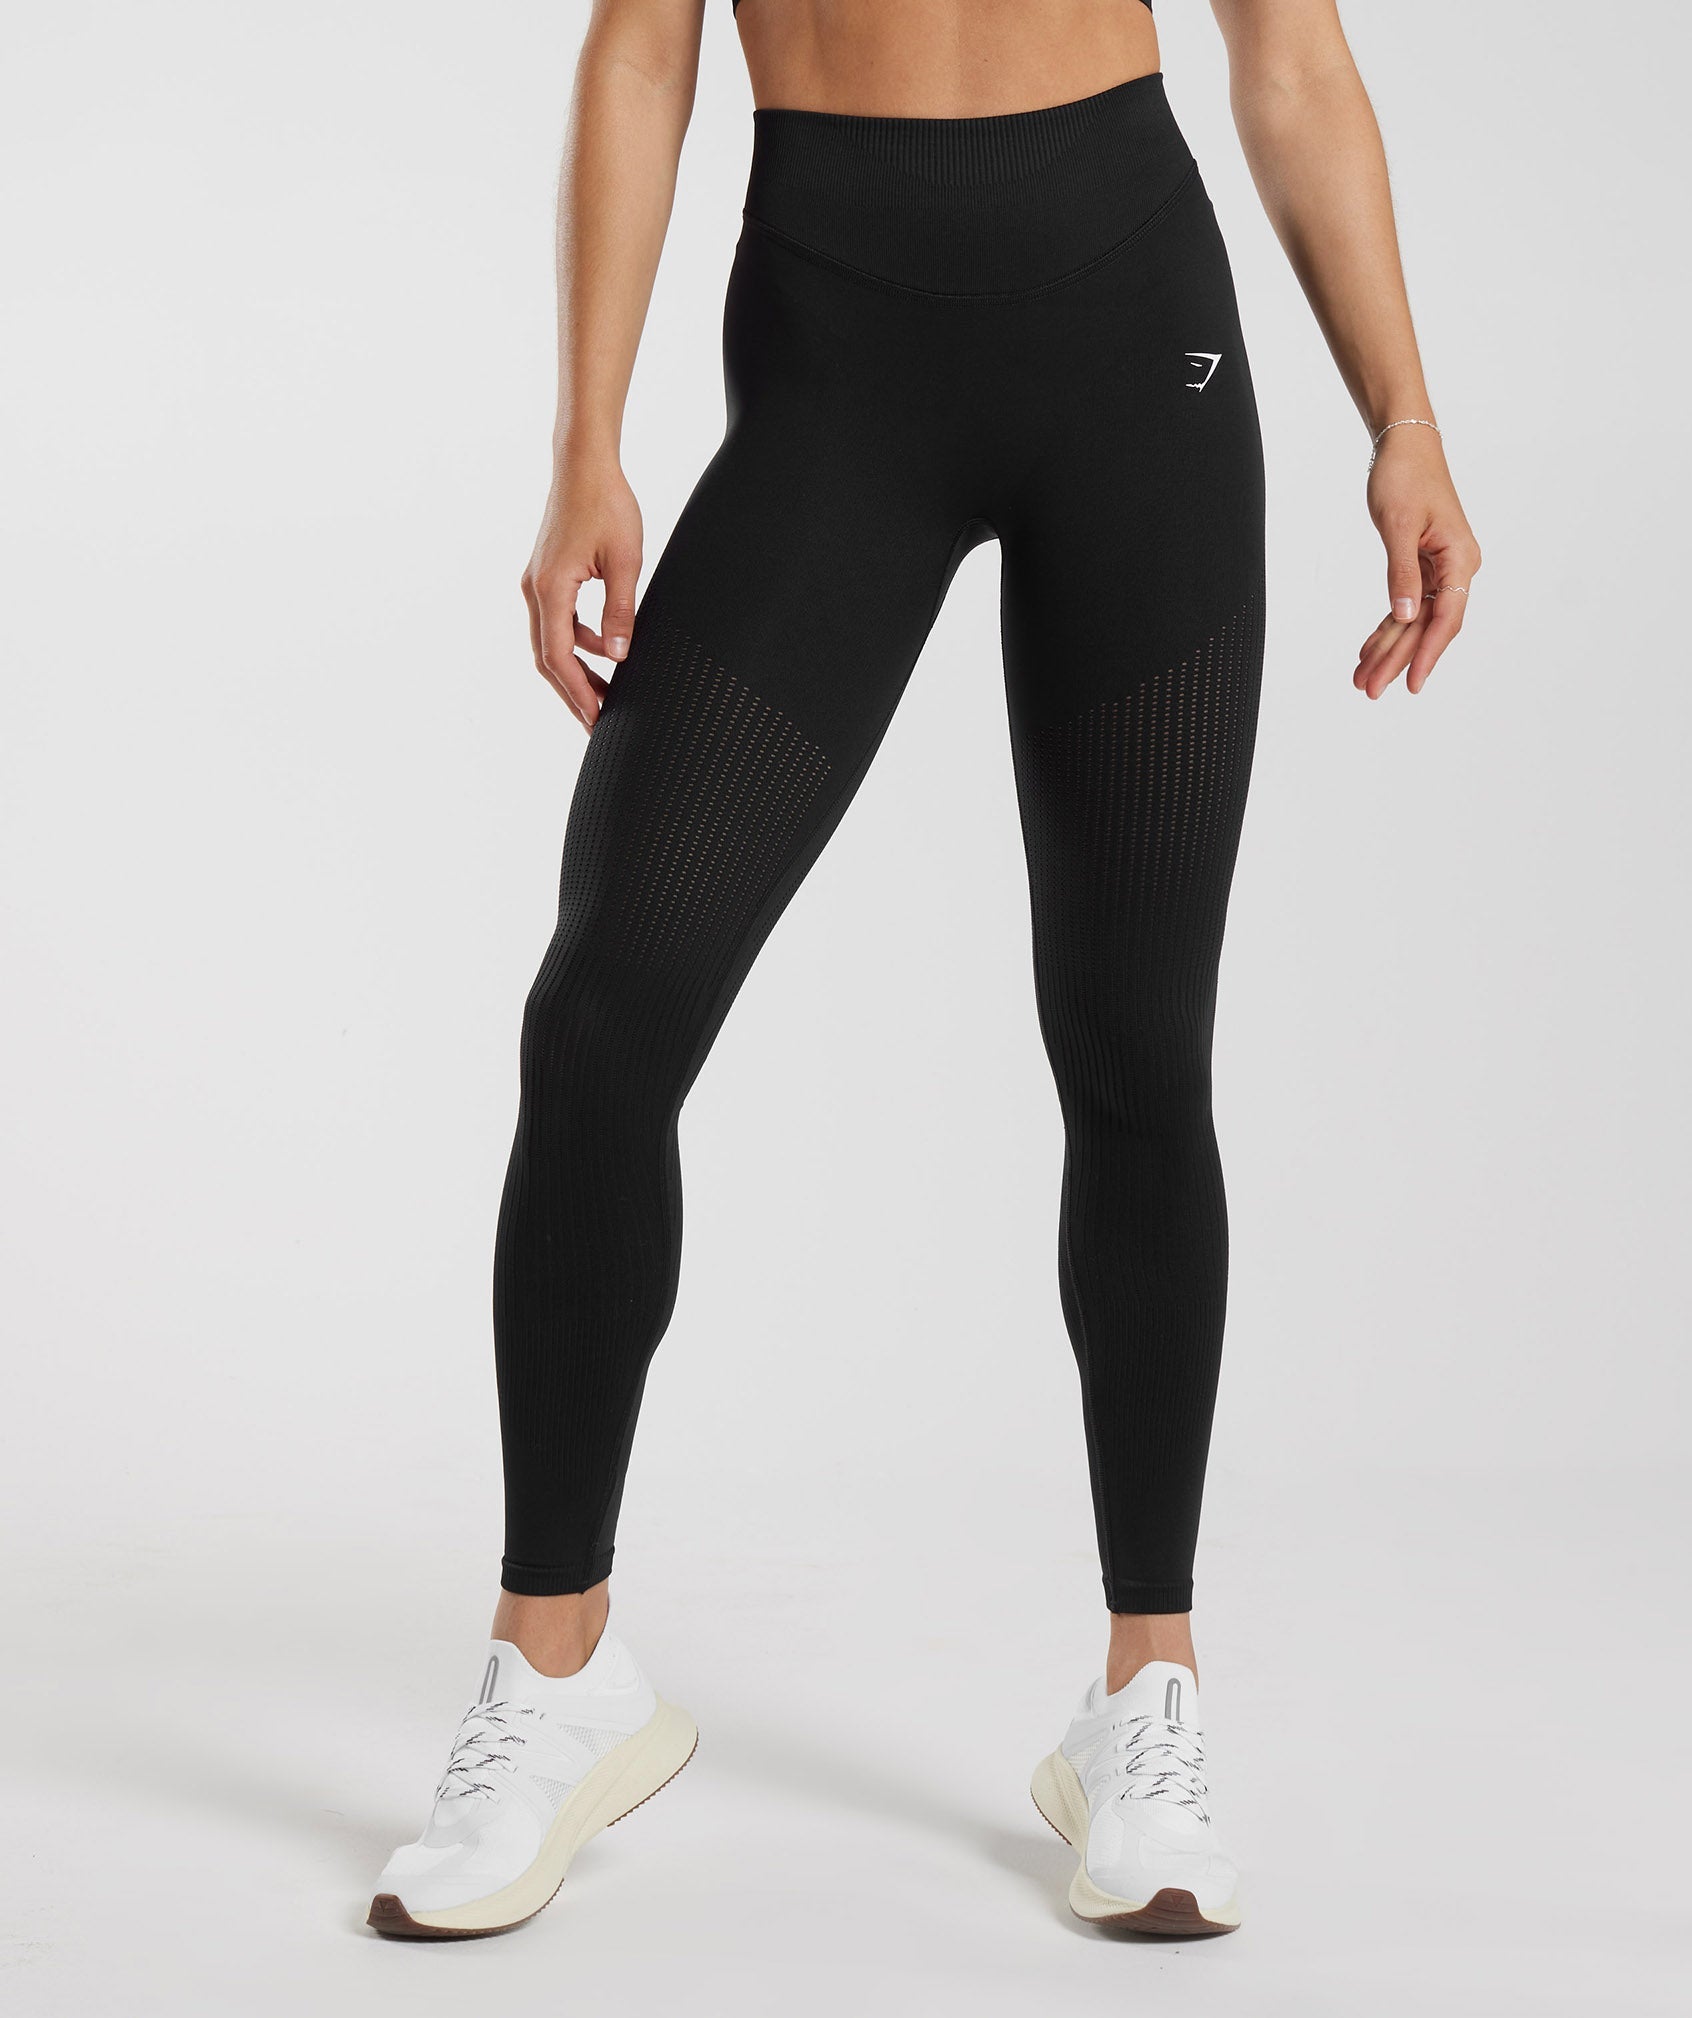 Gymshark leggings - Buy the best product with free shipping on